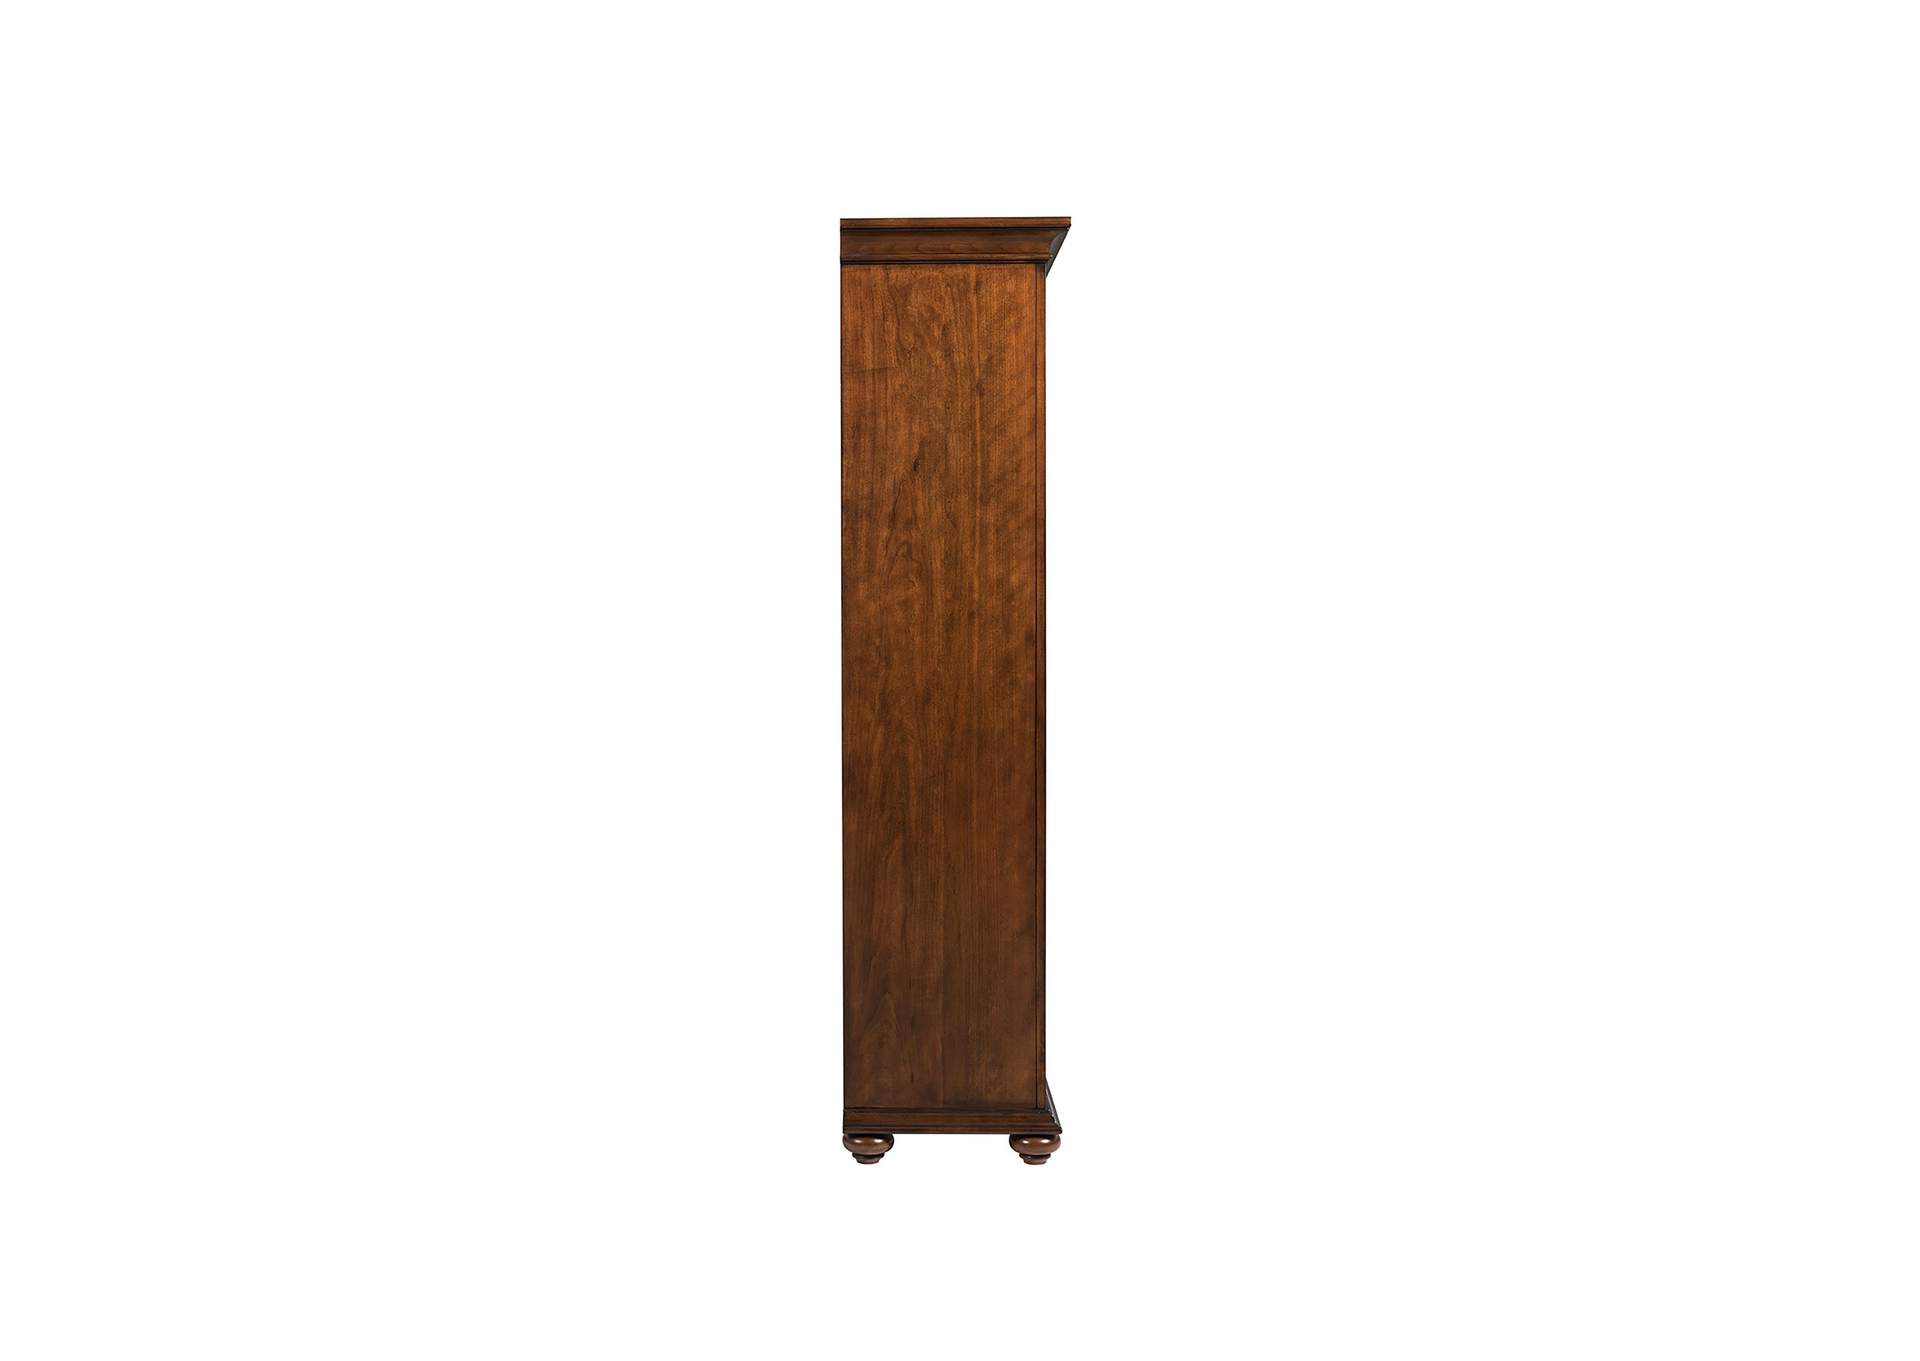 Clinton Hill Classic Cherry Drawer Bookcase,Riverside